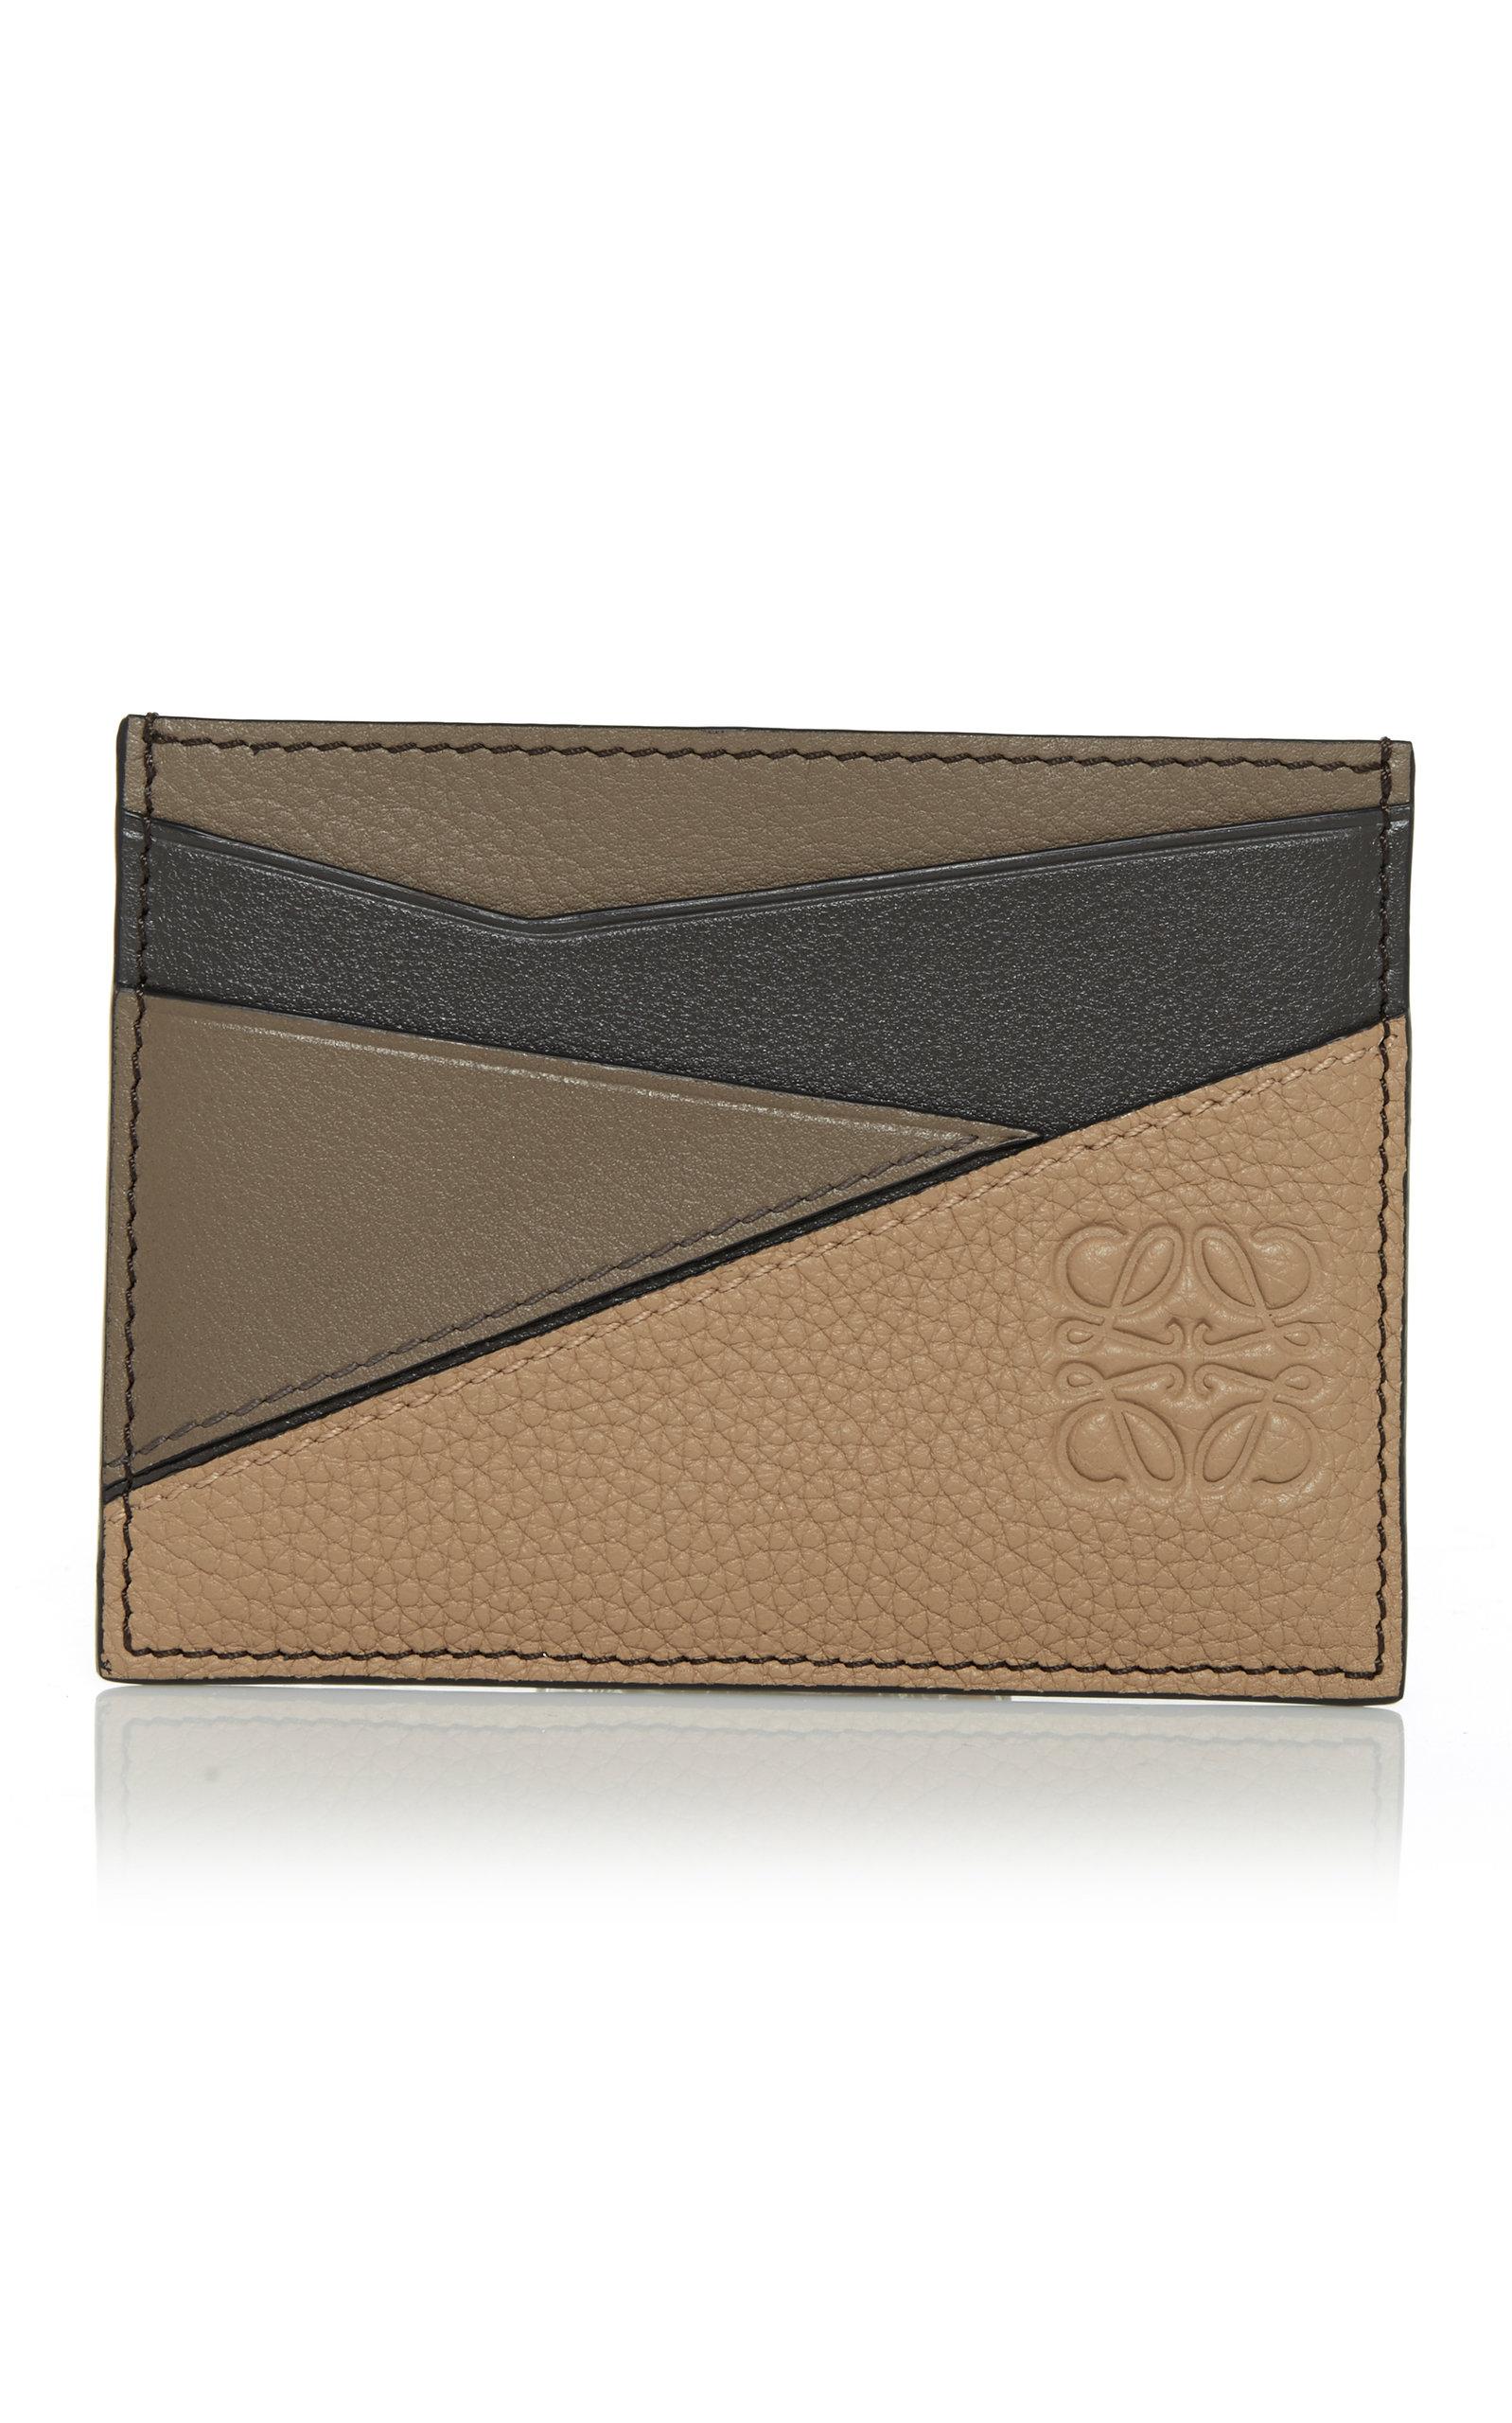 Loewe Puzzle Leather Cardholder in Brown for Men - Lyst